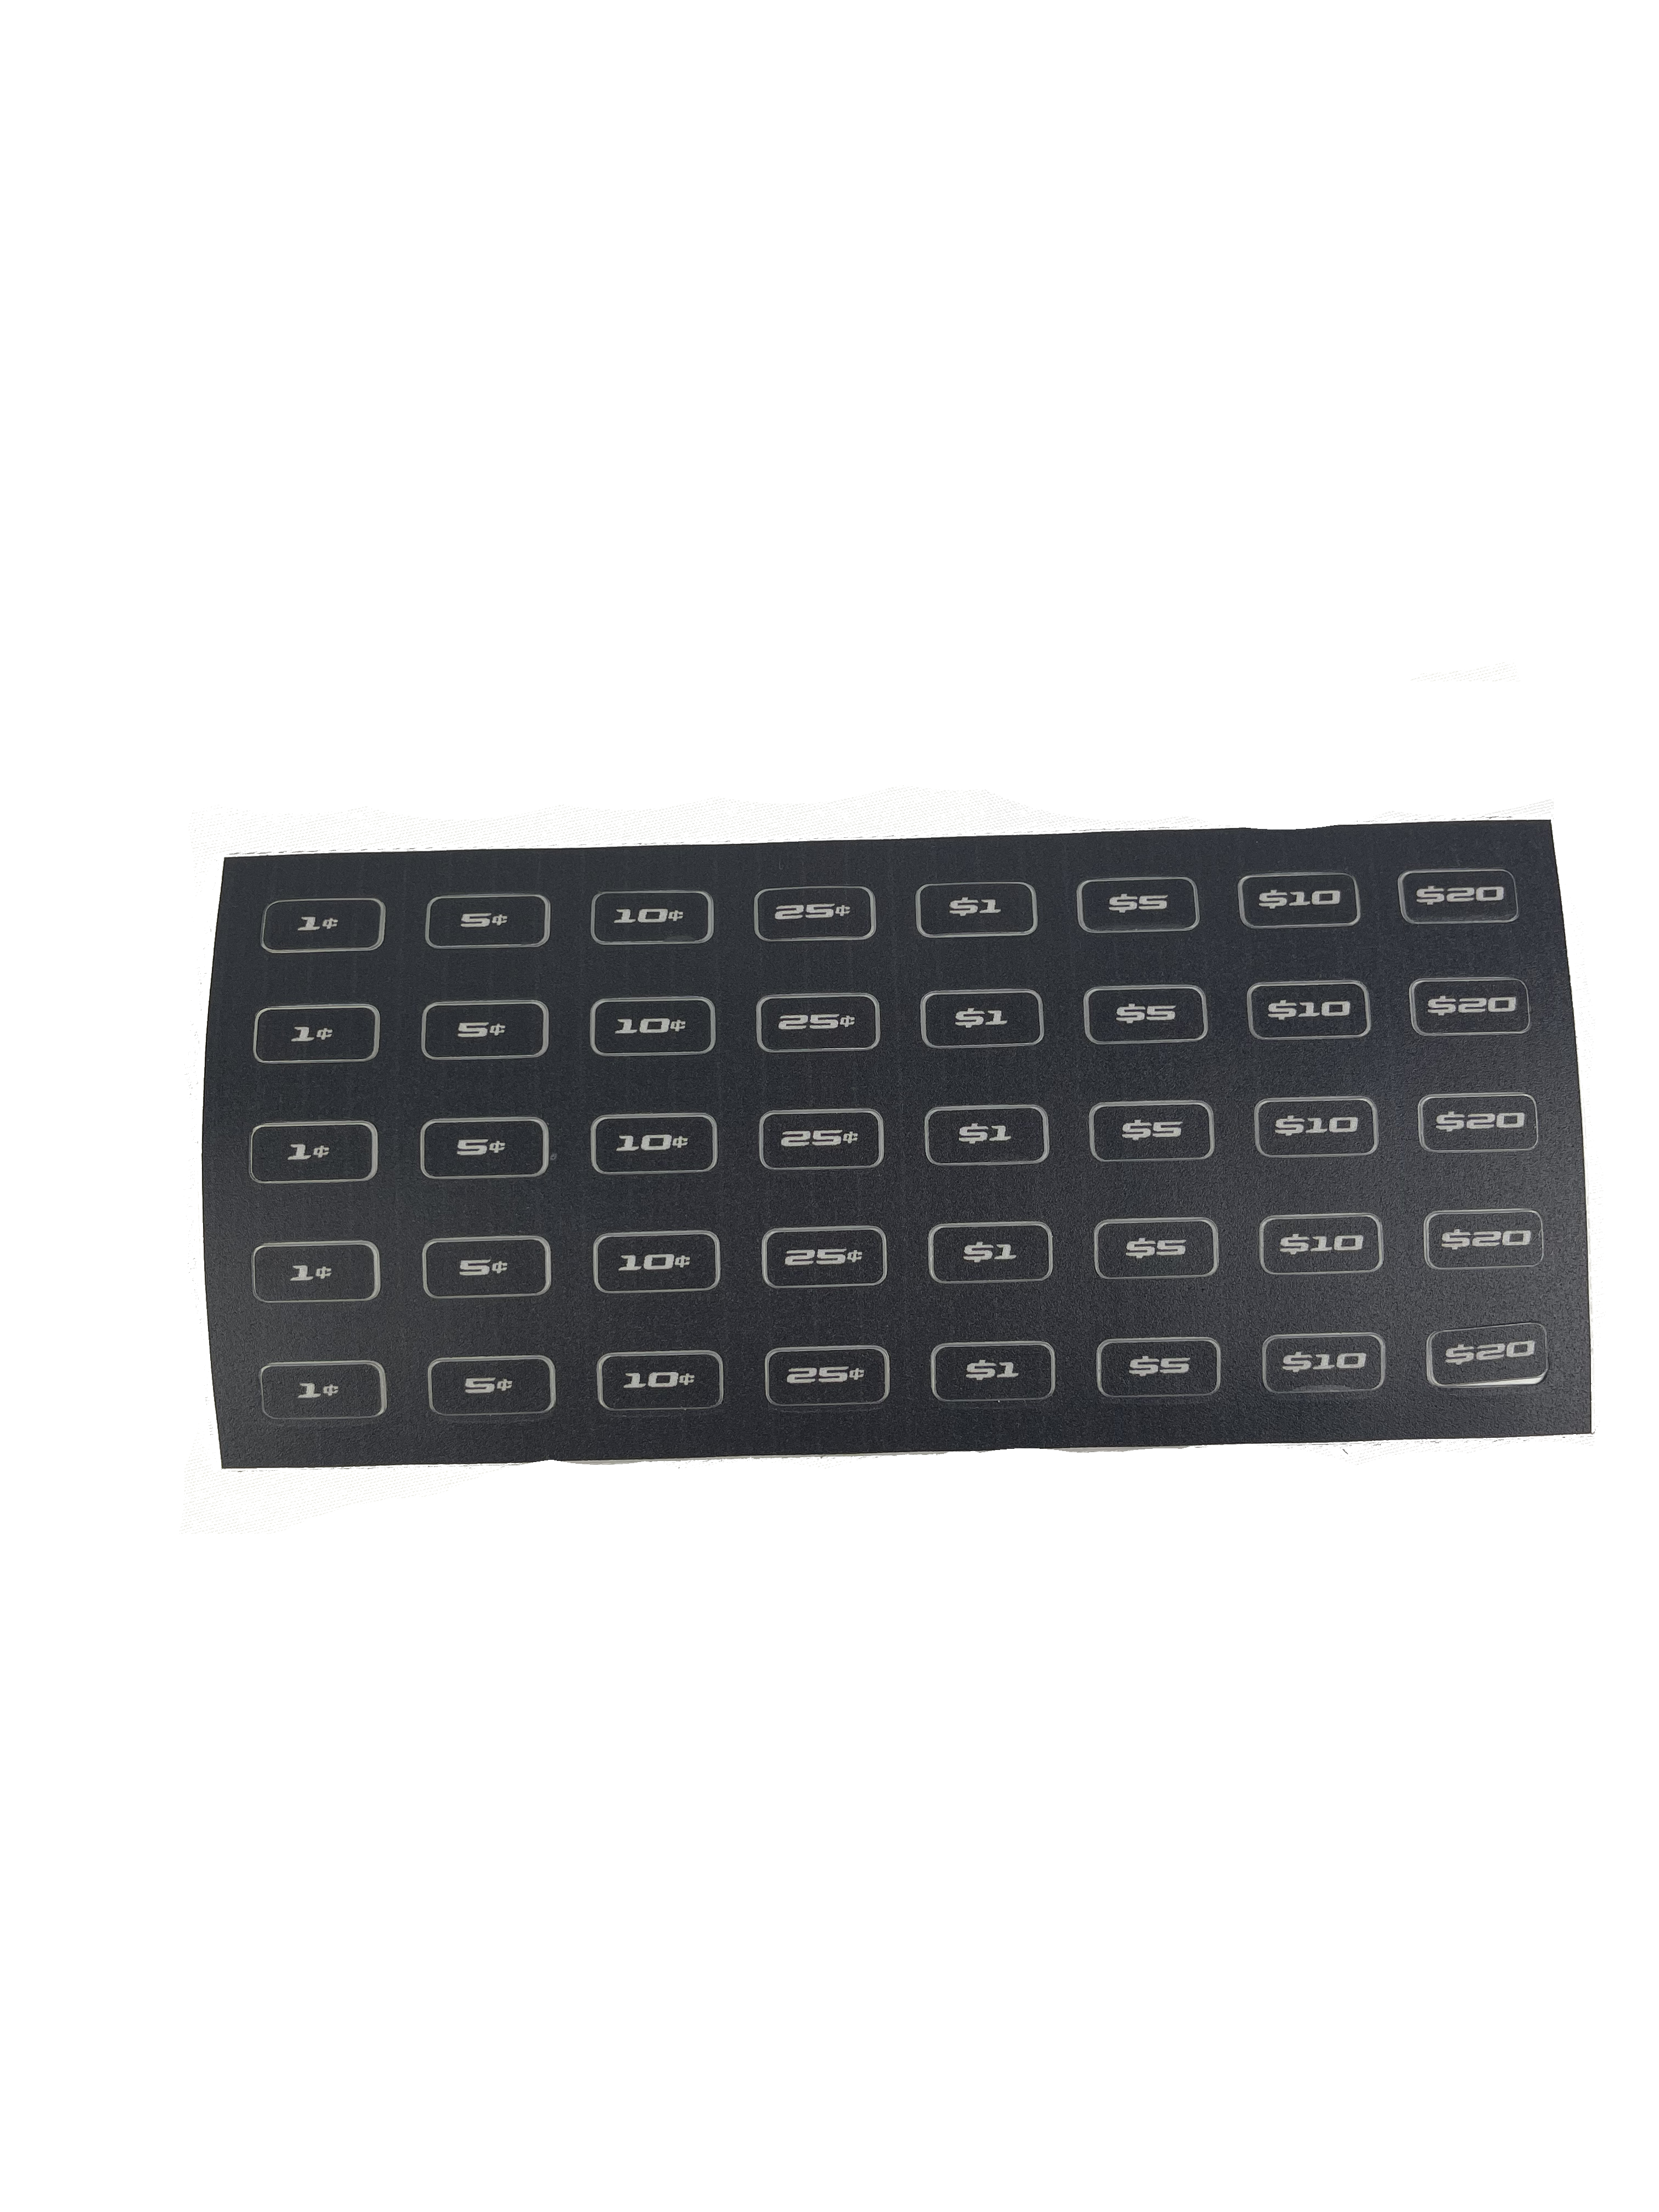 Decal Kit - Control Panel Denomination - Grey Numbers (Qty = 2). Image